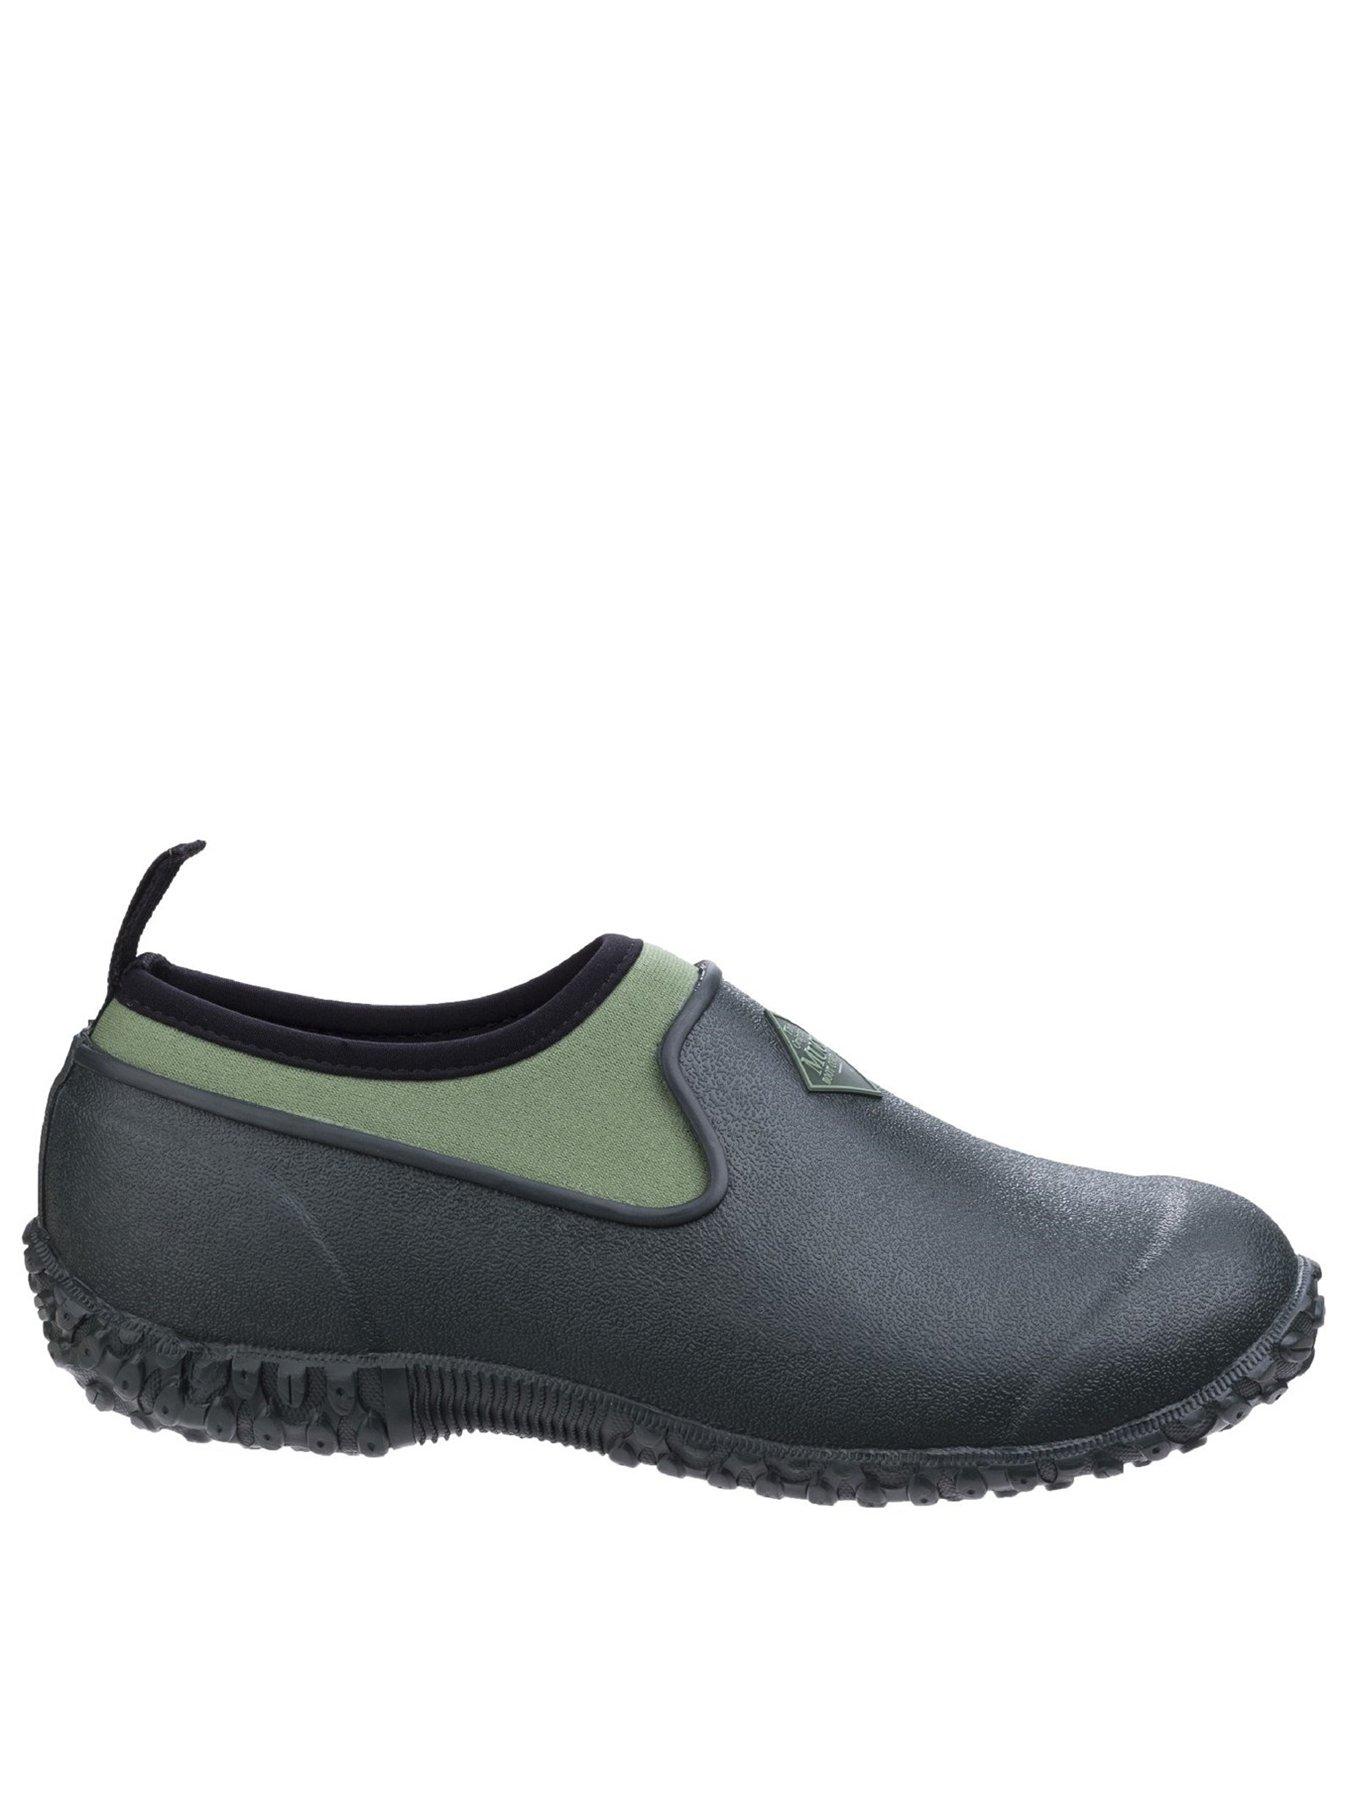 Shoes & boots Muckster II Low Welly Shoe - Green